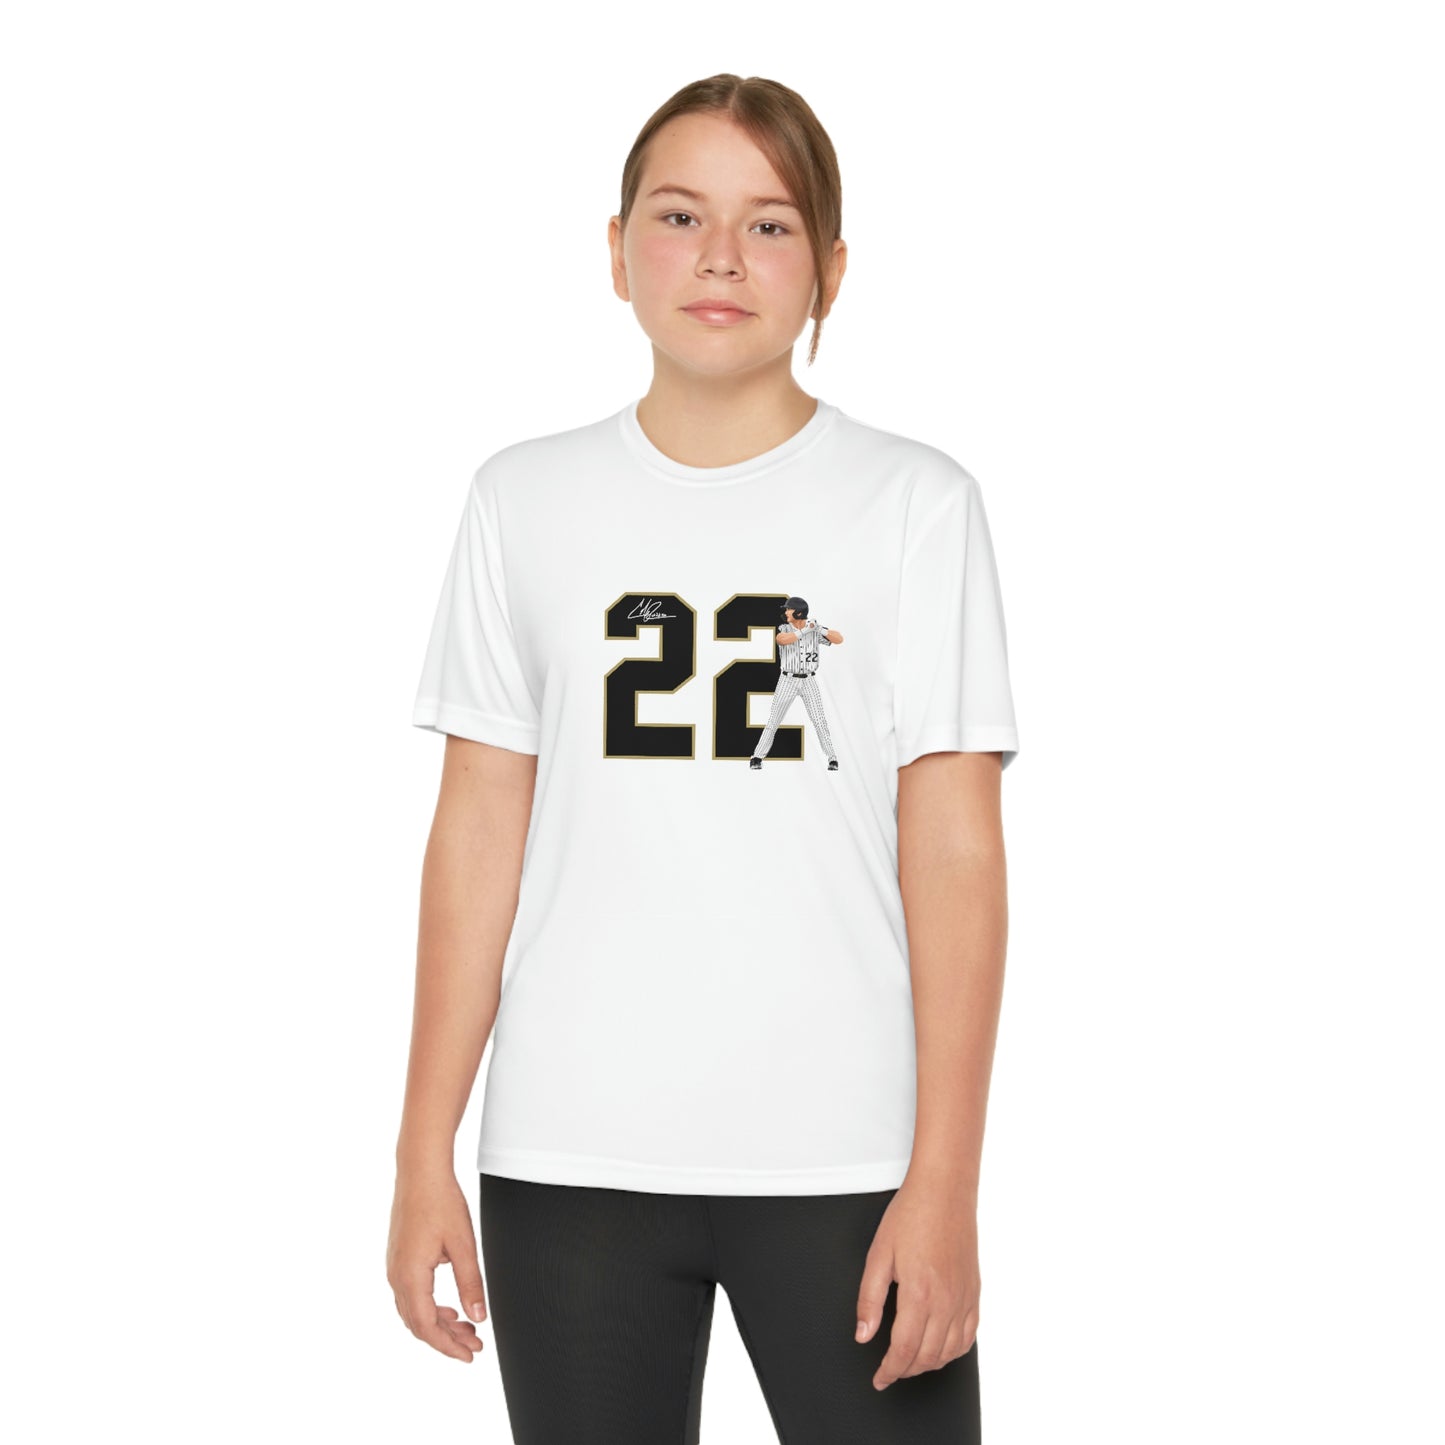 Cole Russo YOUTH Performance Shirt